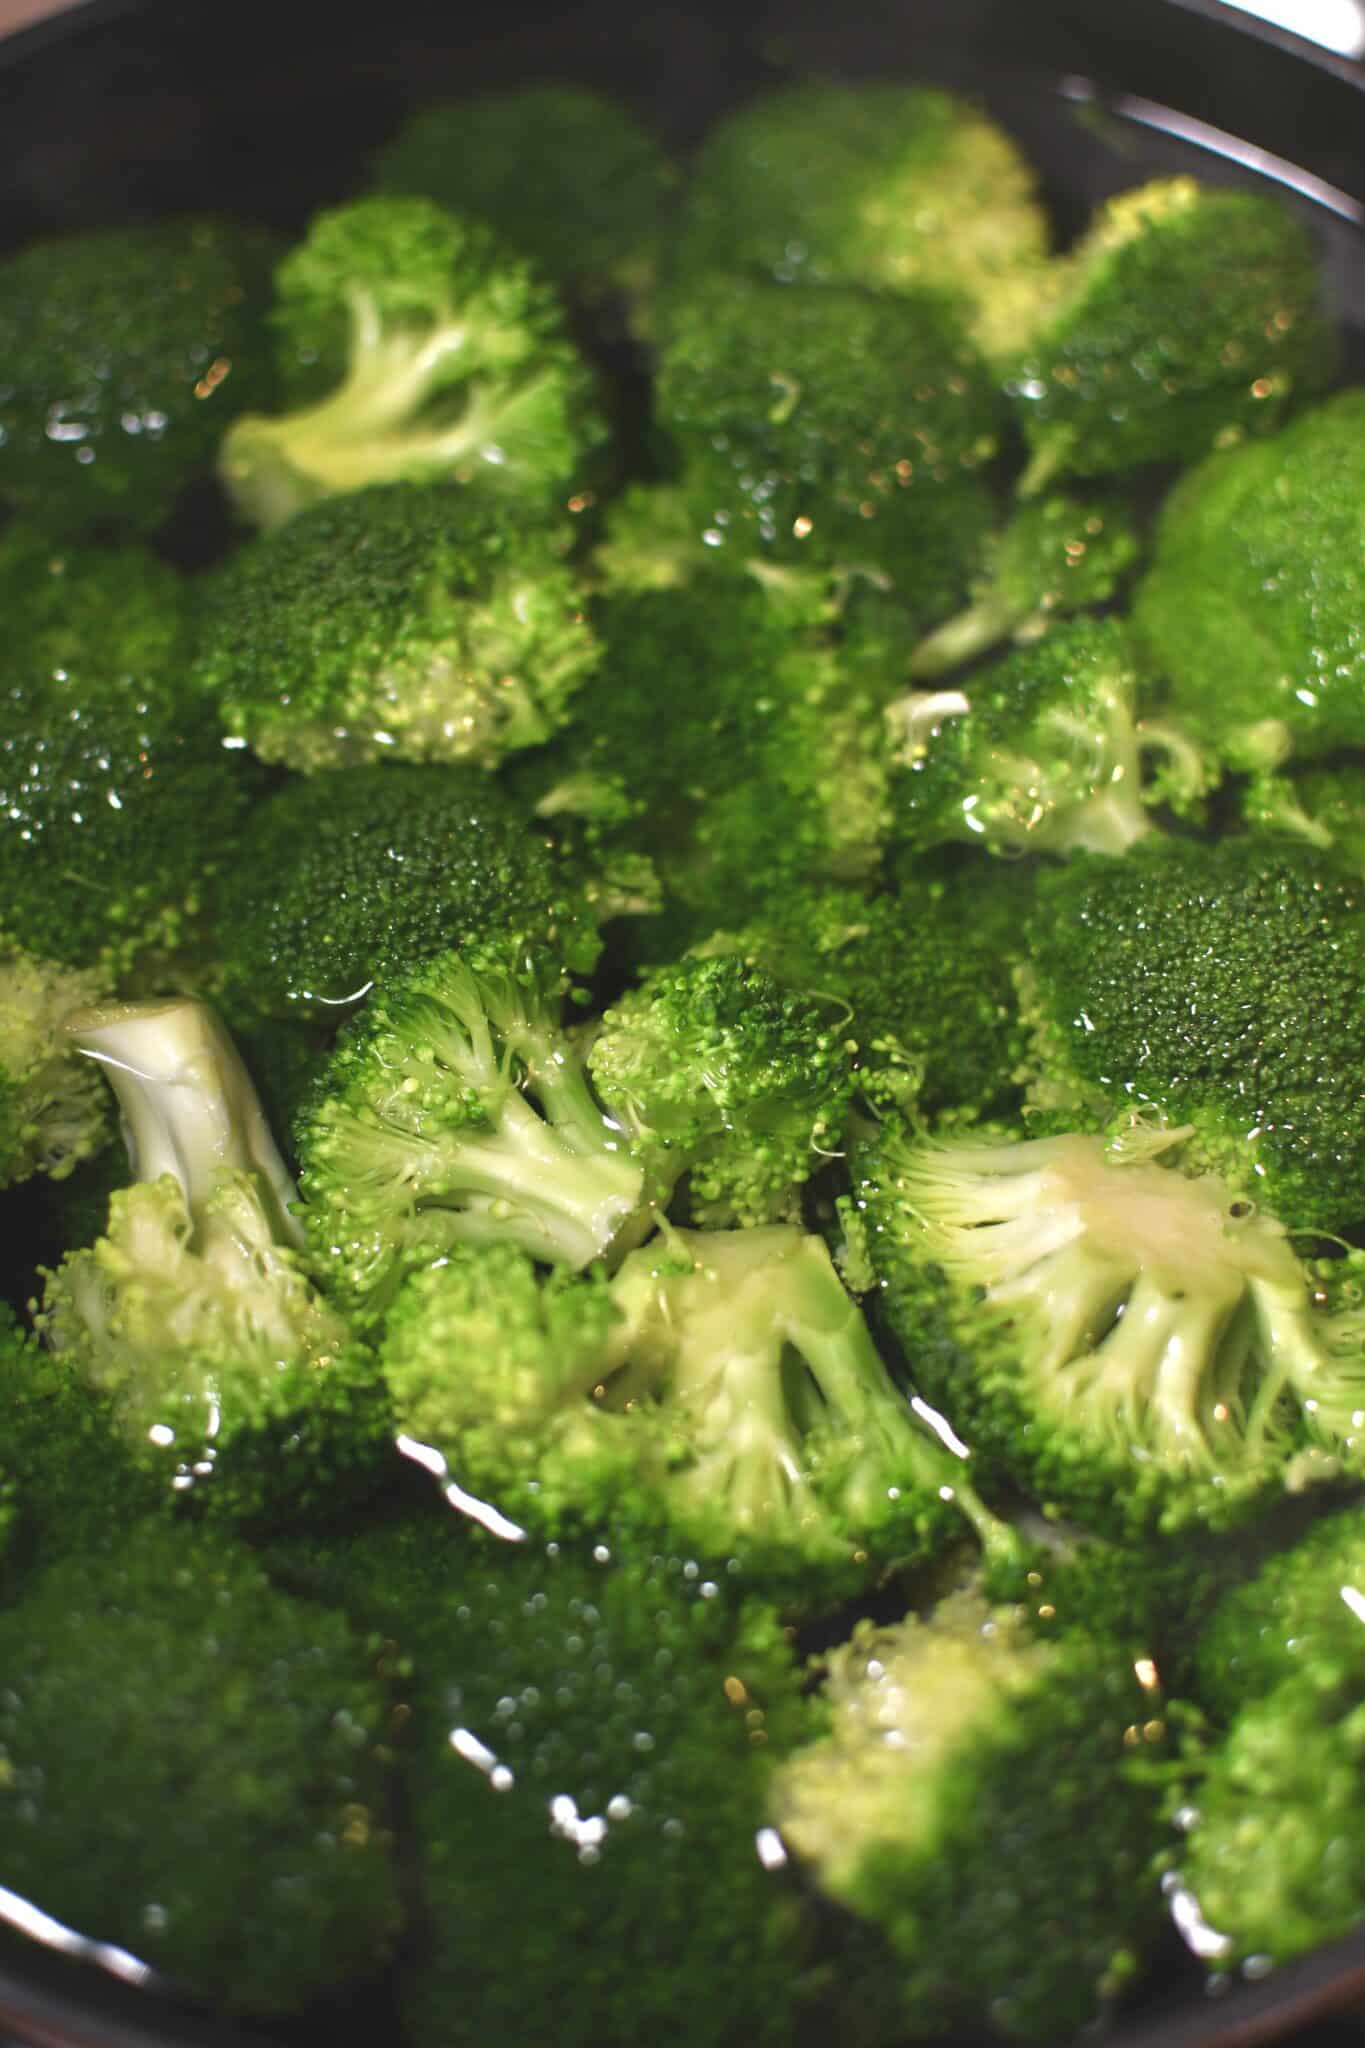 Broccoli added to boiling water to blanch for 1 minute.